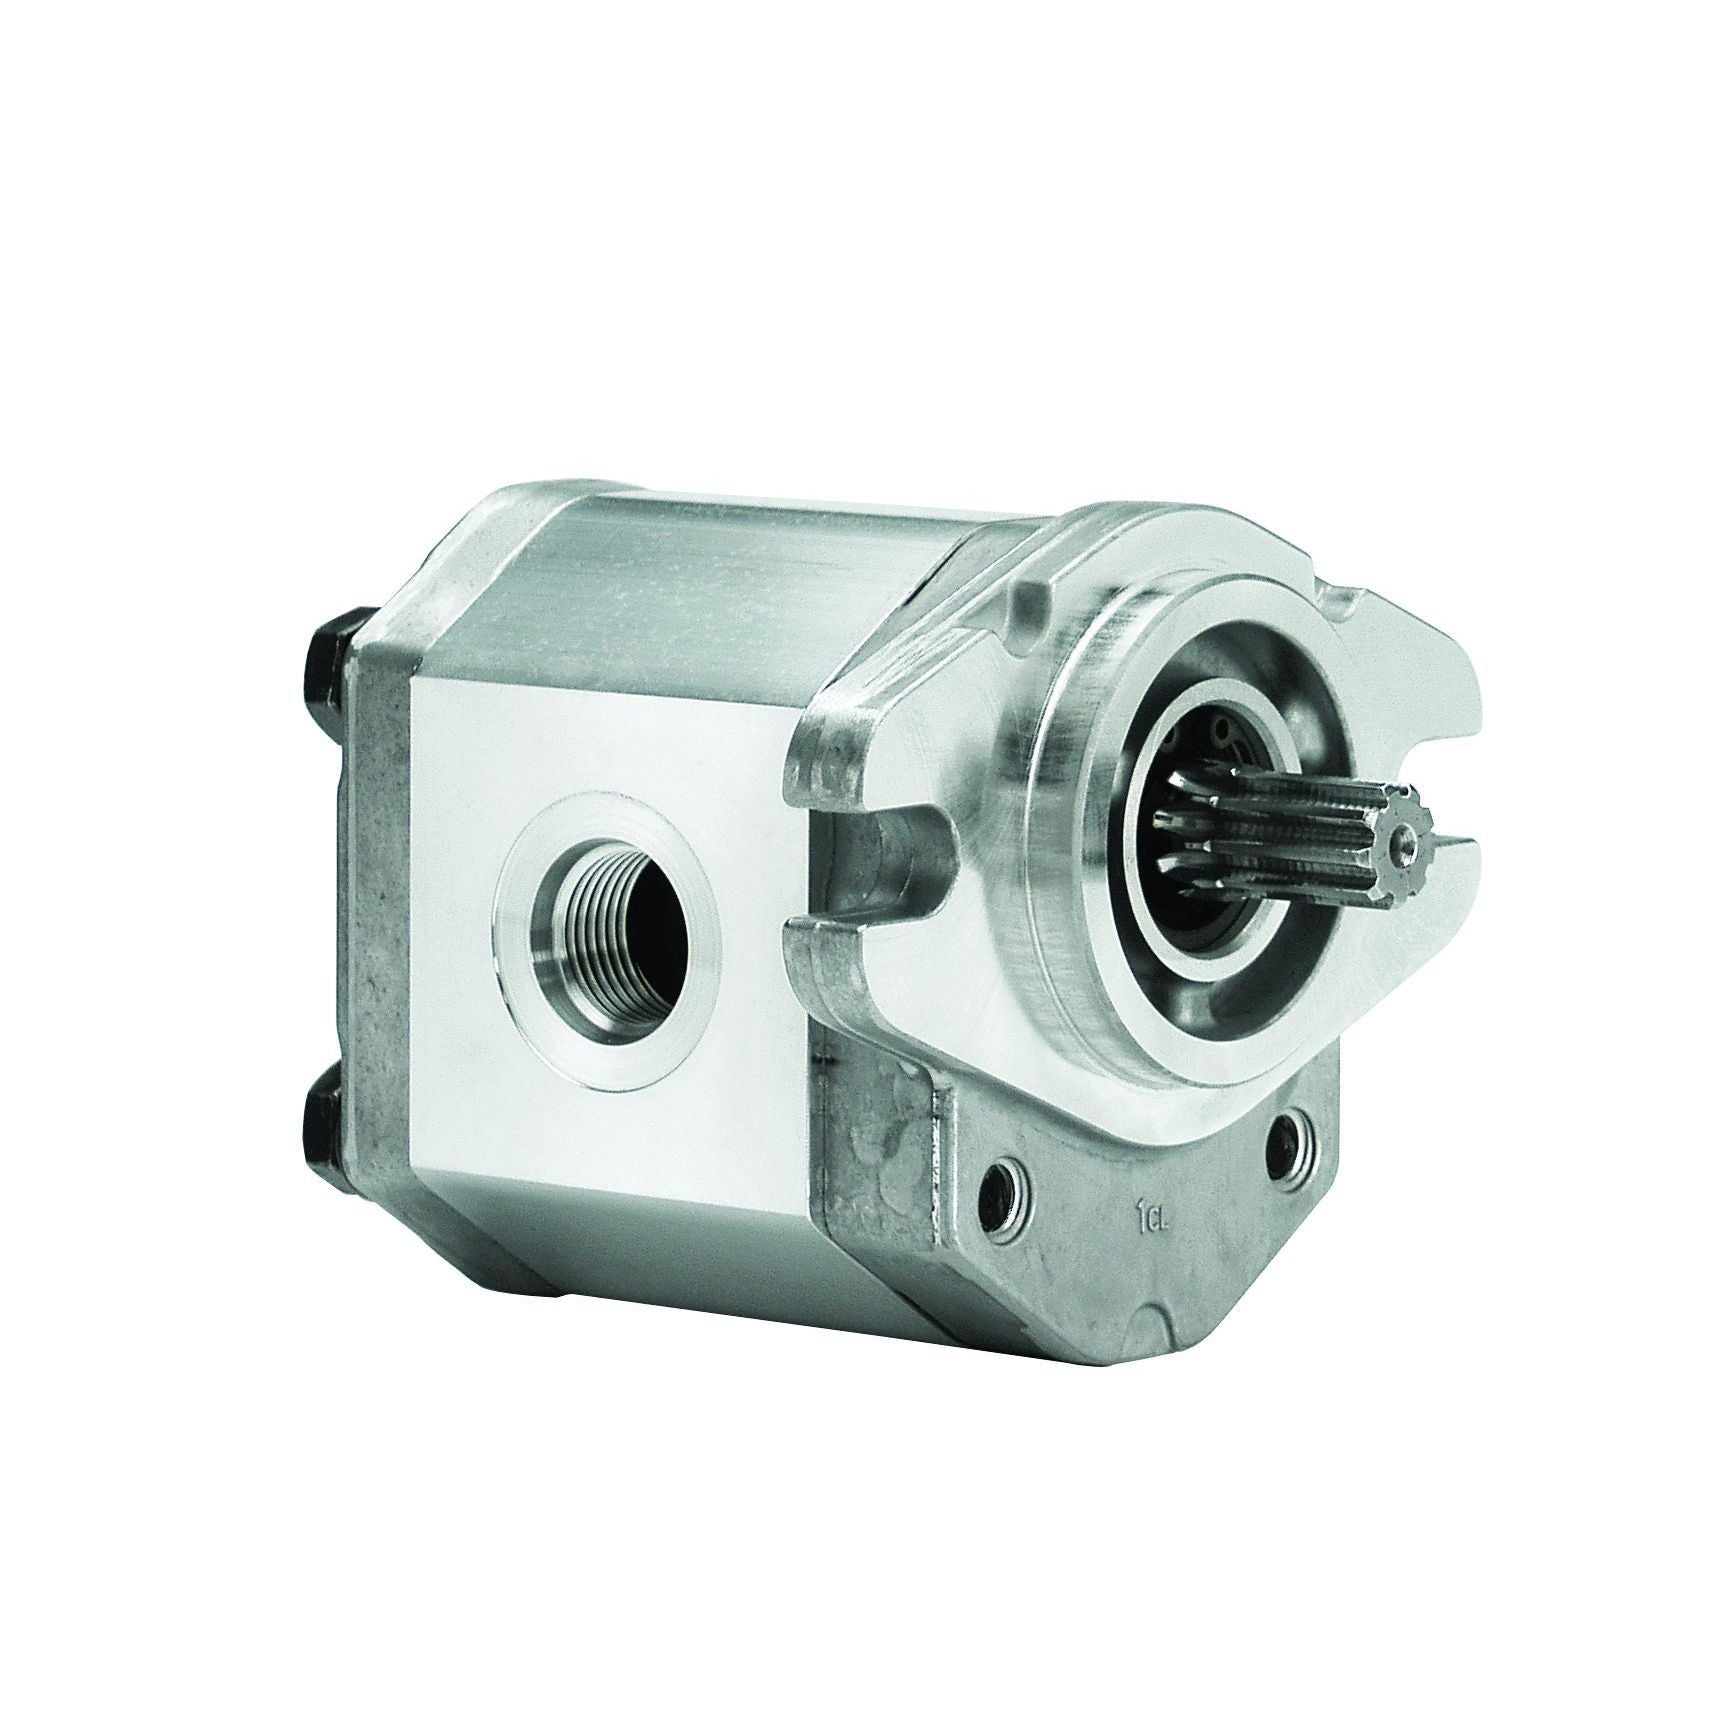 ALP2A-S-12-S1 : Marzocchi Gear Pump, CCW, 8.3cc (0.5063in3), 3.95 GPM, 3625psi, 4000 RPM, #12 SAE (3/4") In, #10 SAE (5/8") Out, Splined Shaft 9T 16/32DP, SAE A 2-Bolt Mount